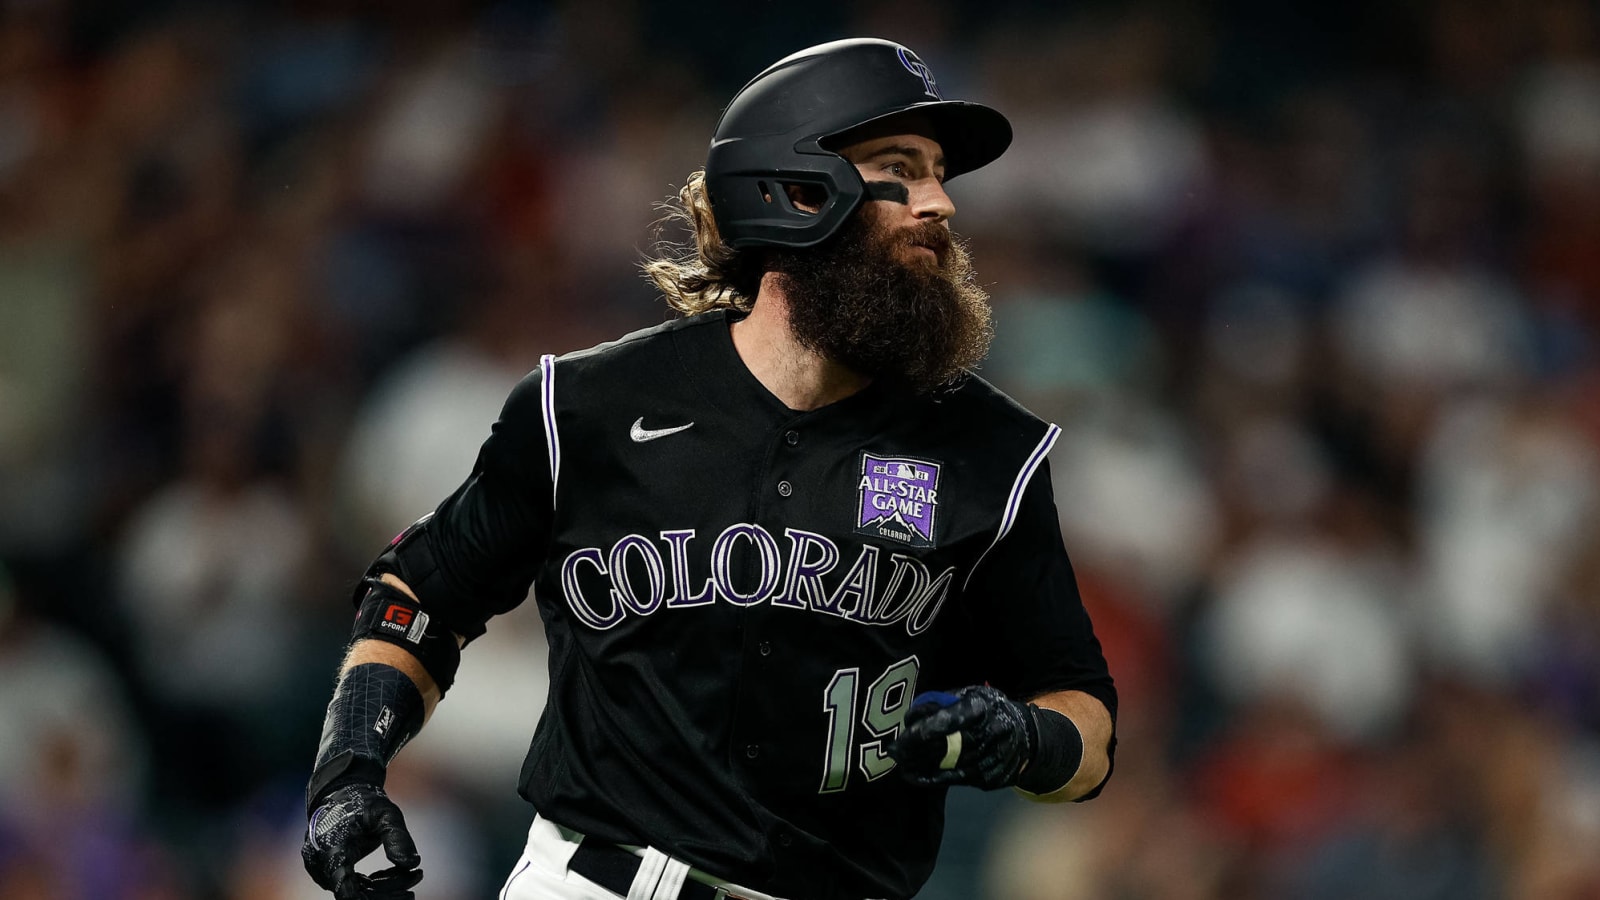 Charlie Blackmon exercises player option, will return to Rockies in 2022,  per report - MLB Daily Dish